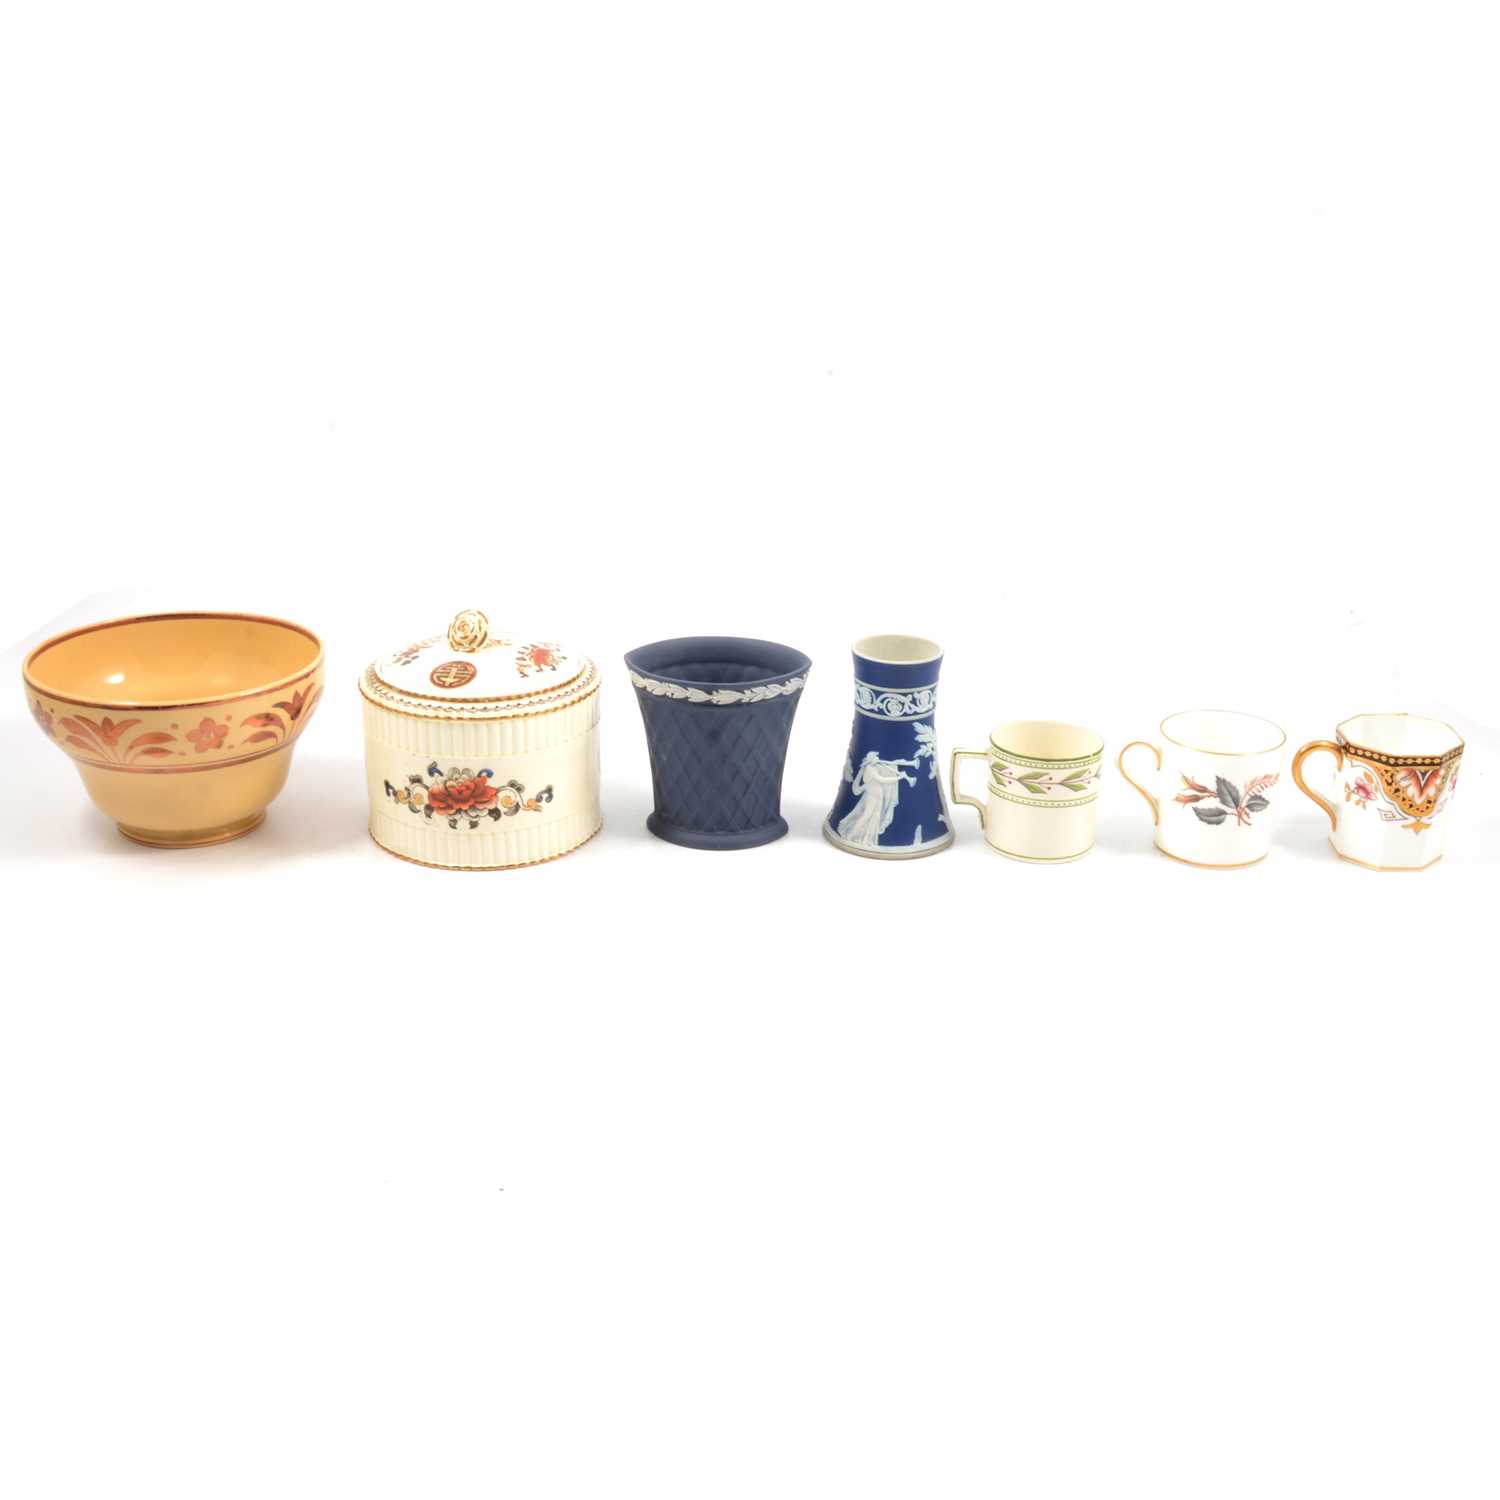 Lot 32 - Collection of Wedgwood ceramics